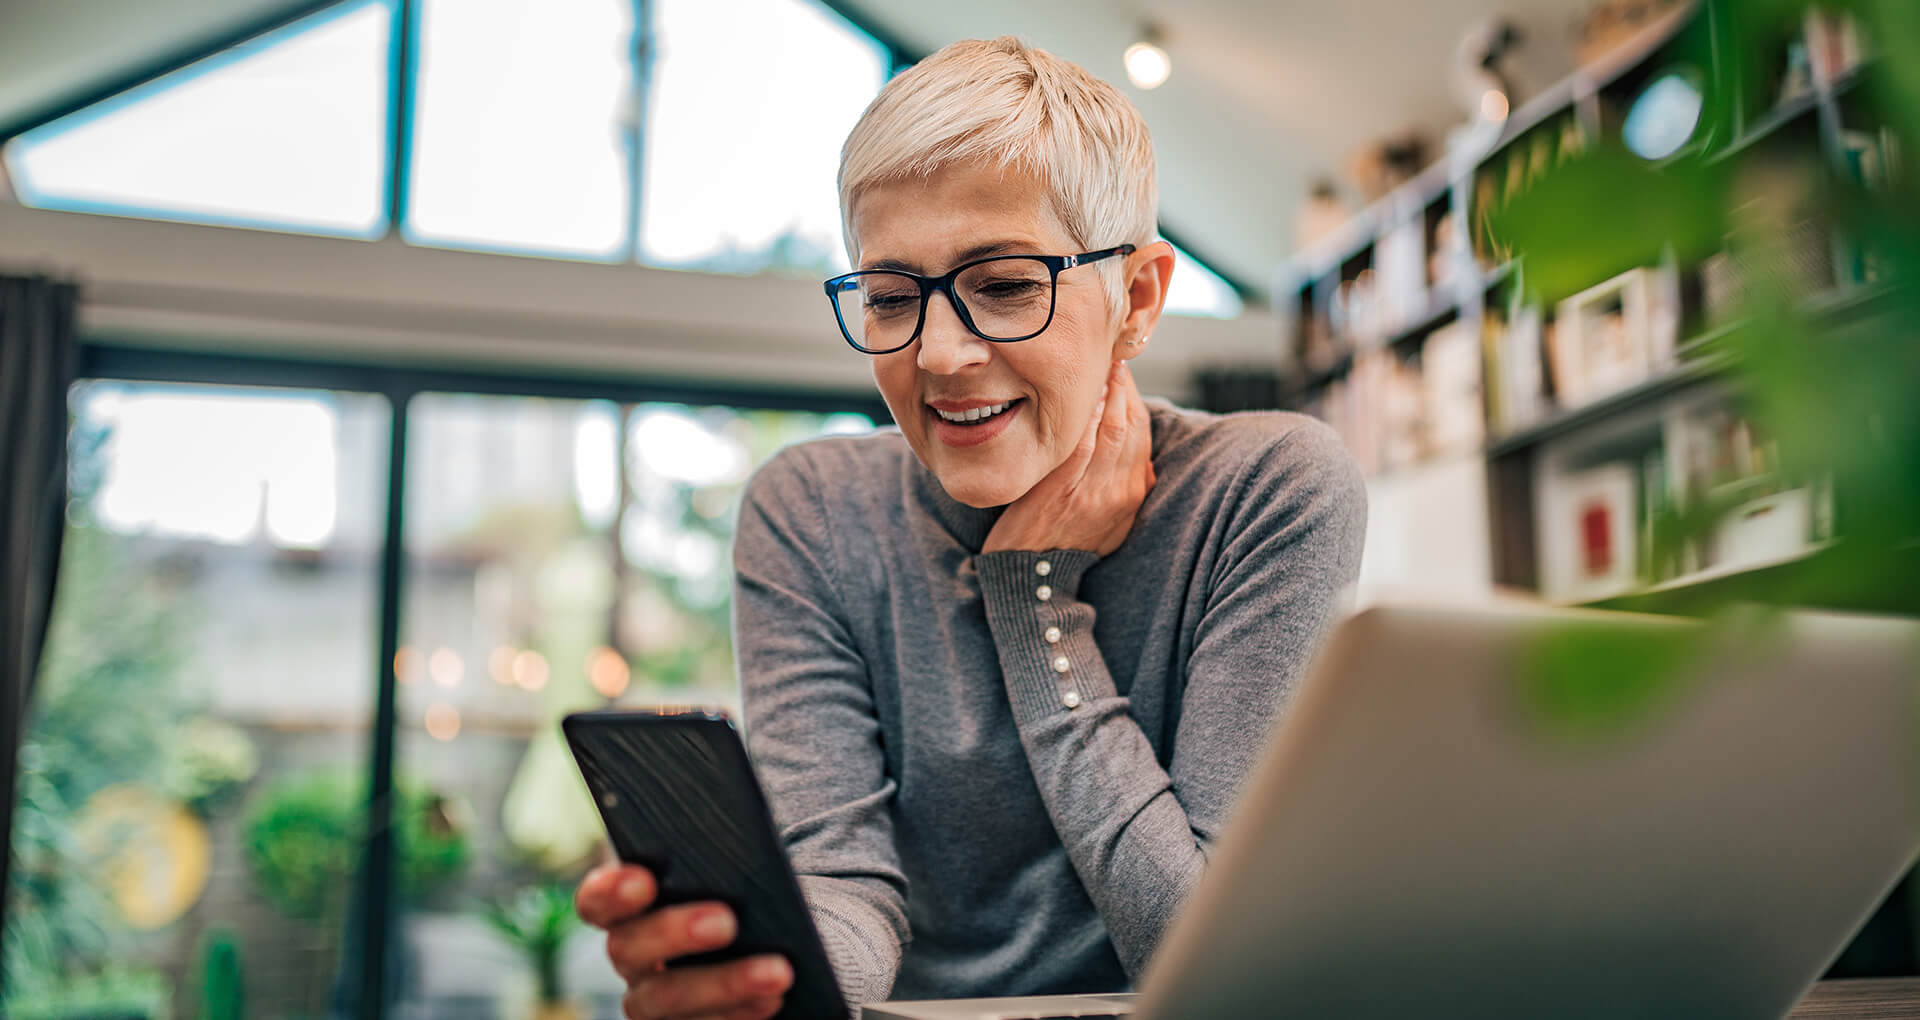 woman looking at phone smiling wearing glasses | AdvancedMD